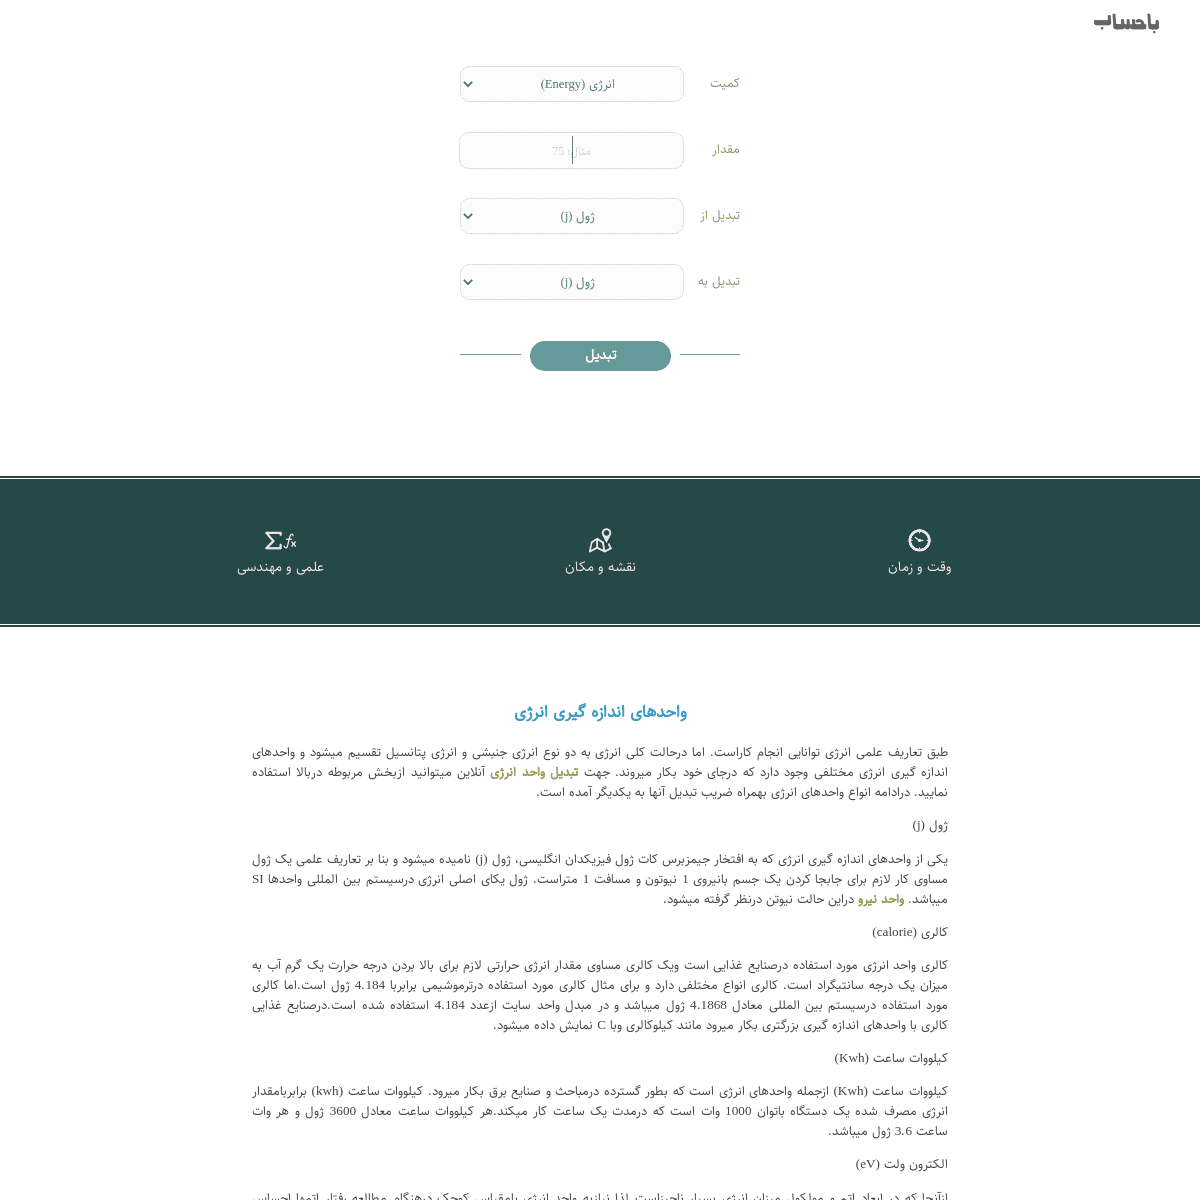 A complete backup of https://www.bahesab.ir/calc/unit-energy/